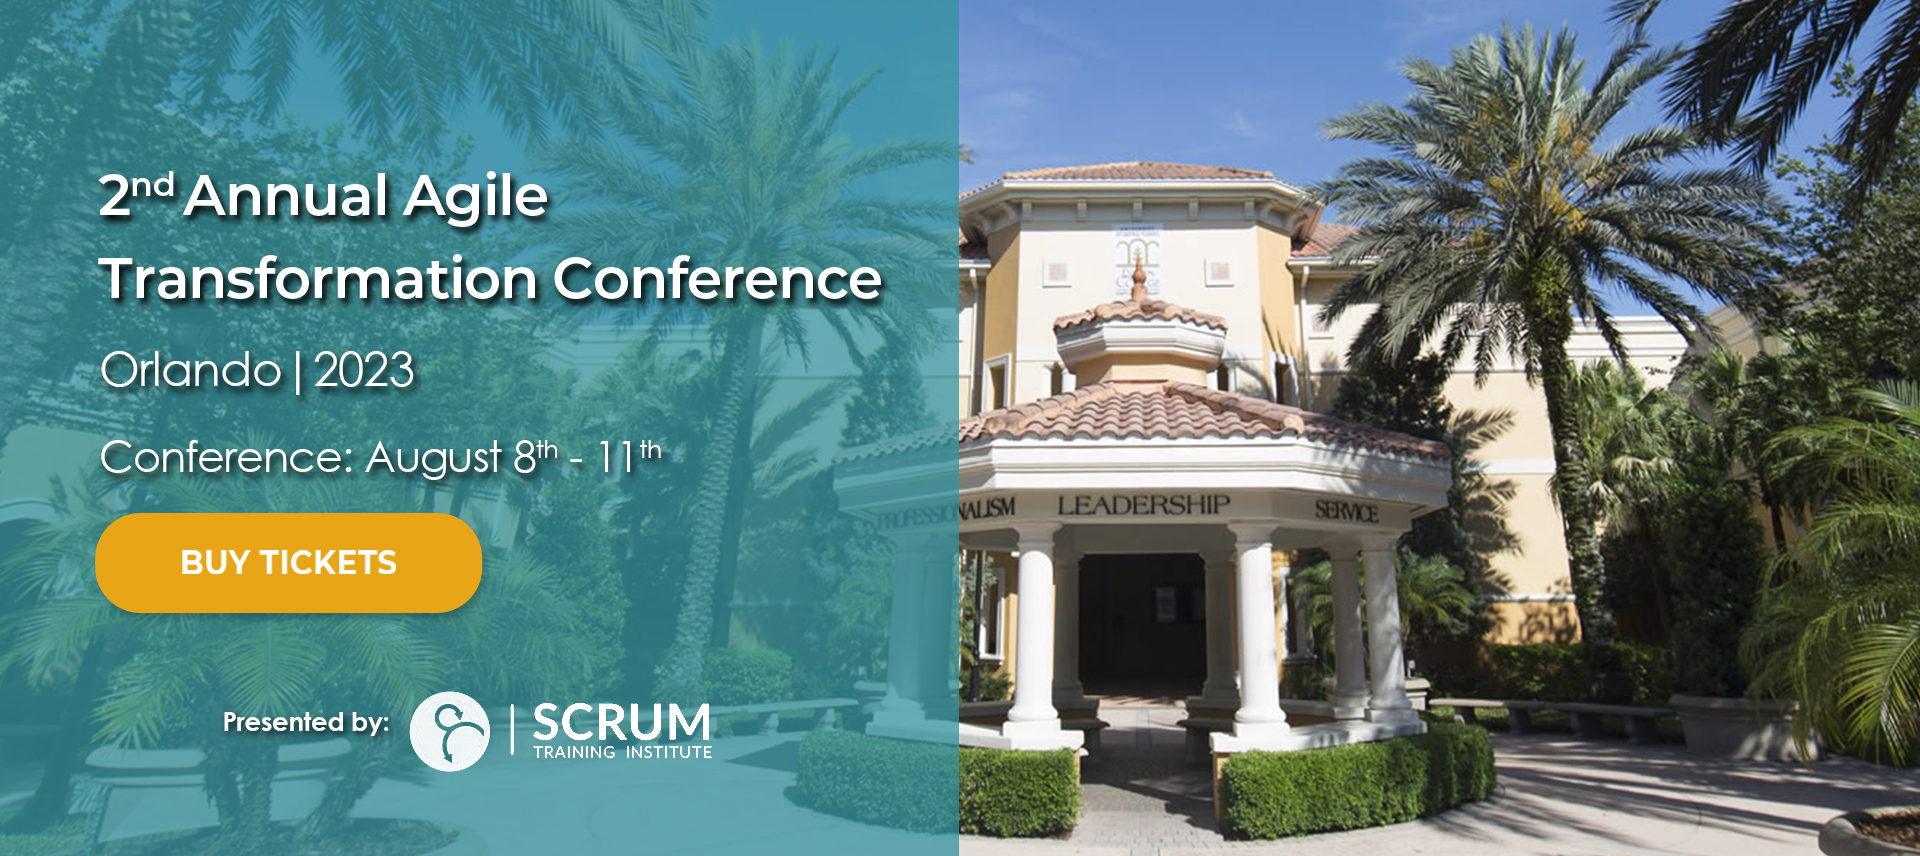 2nd Annual Agile Transformation Conference, Orlando, 2023, Conference August 8th to 11th Buy Tickets, Presented by Scrum Training Institute